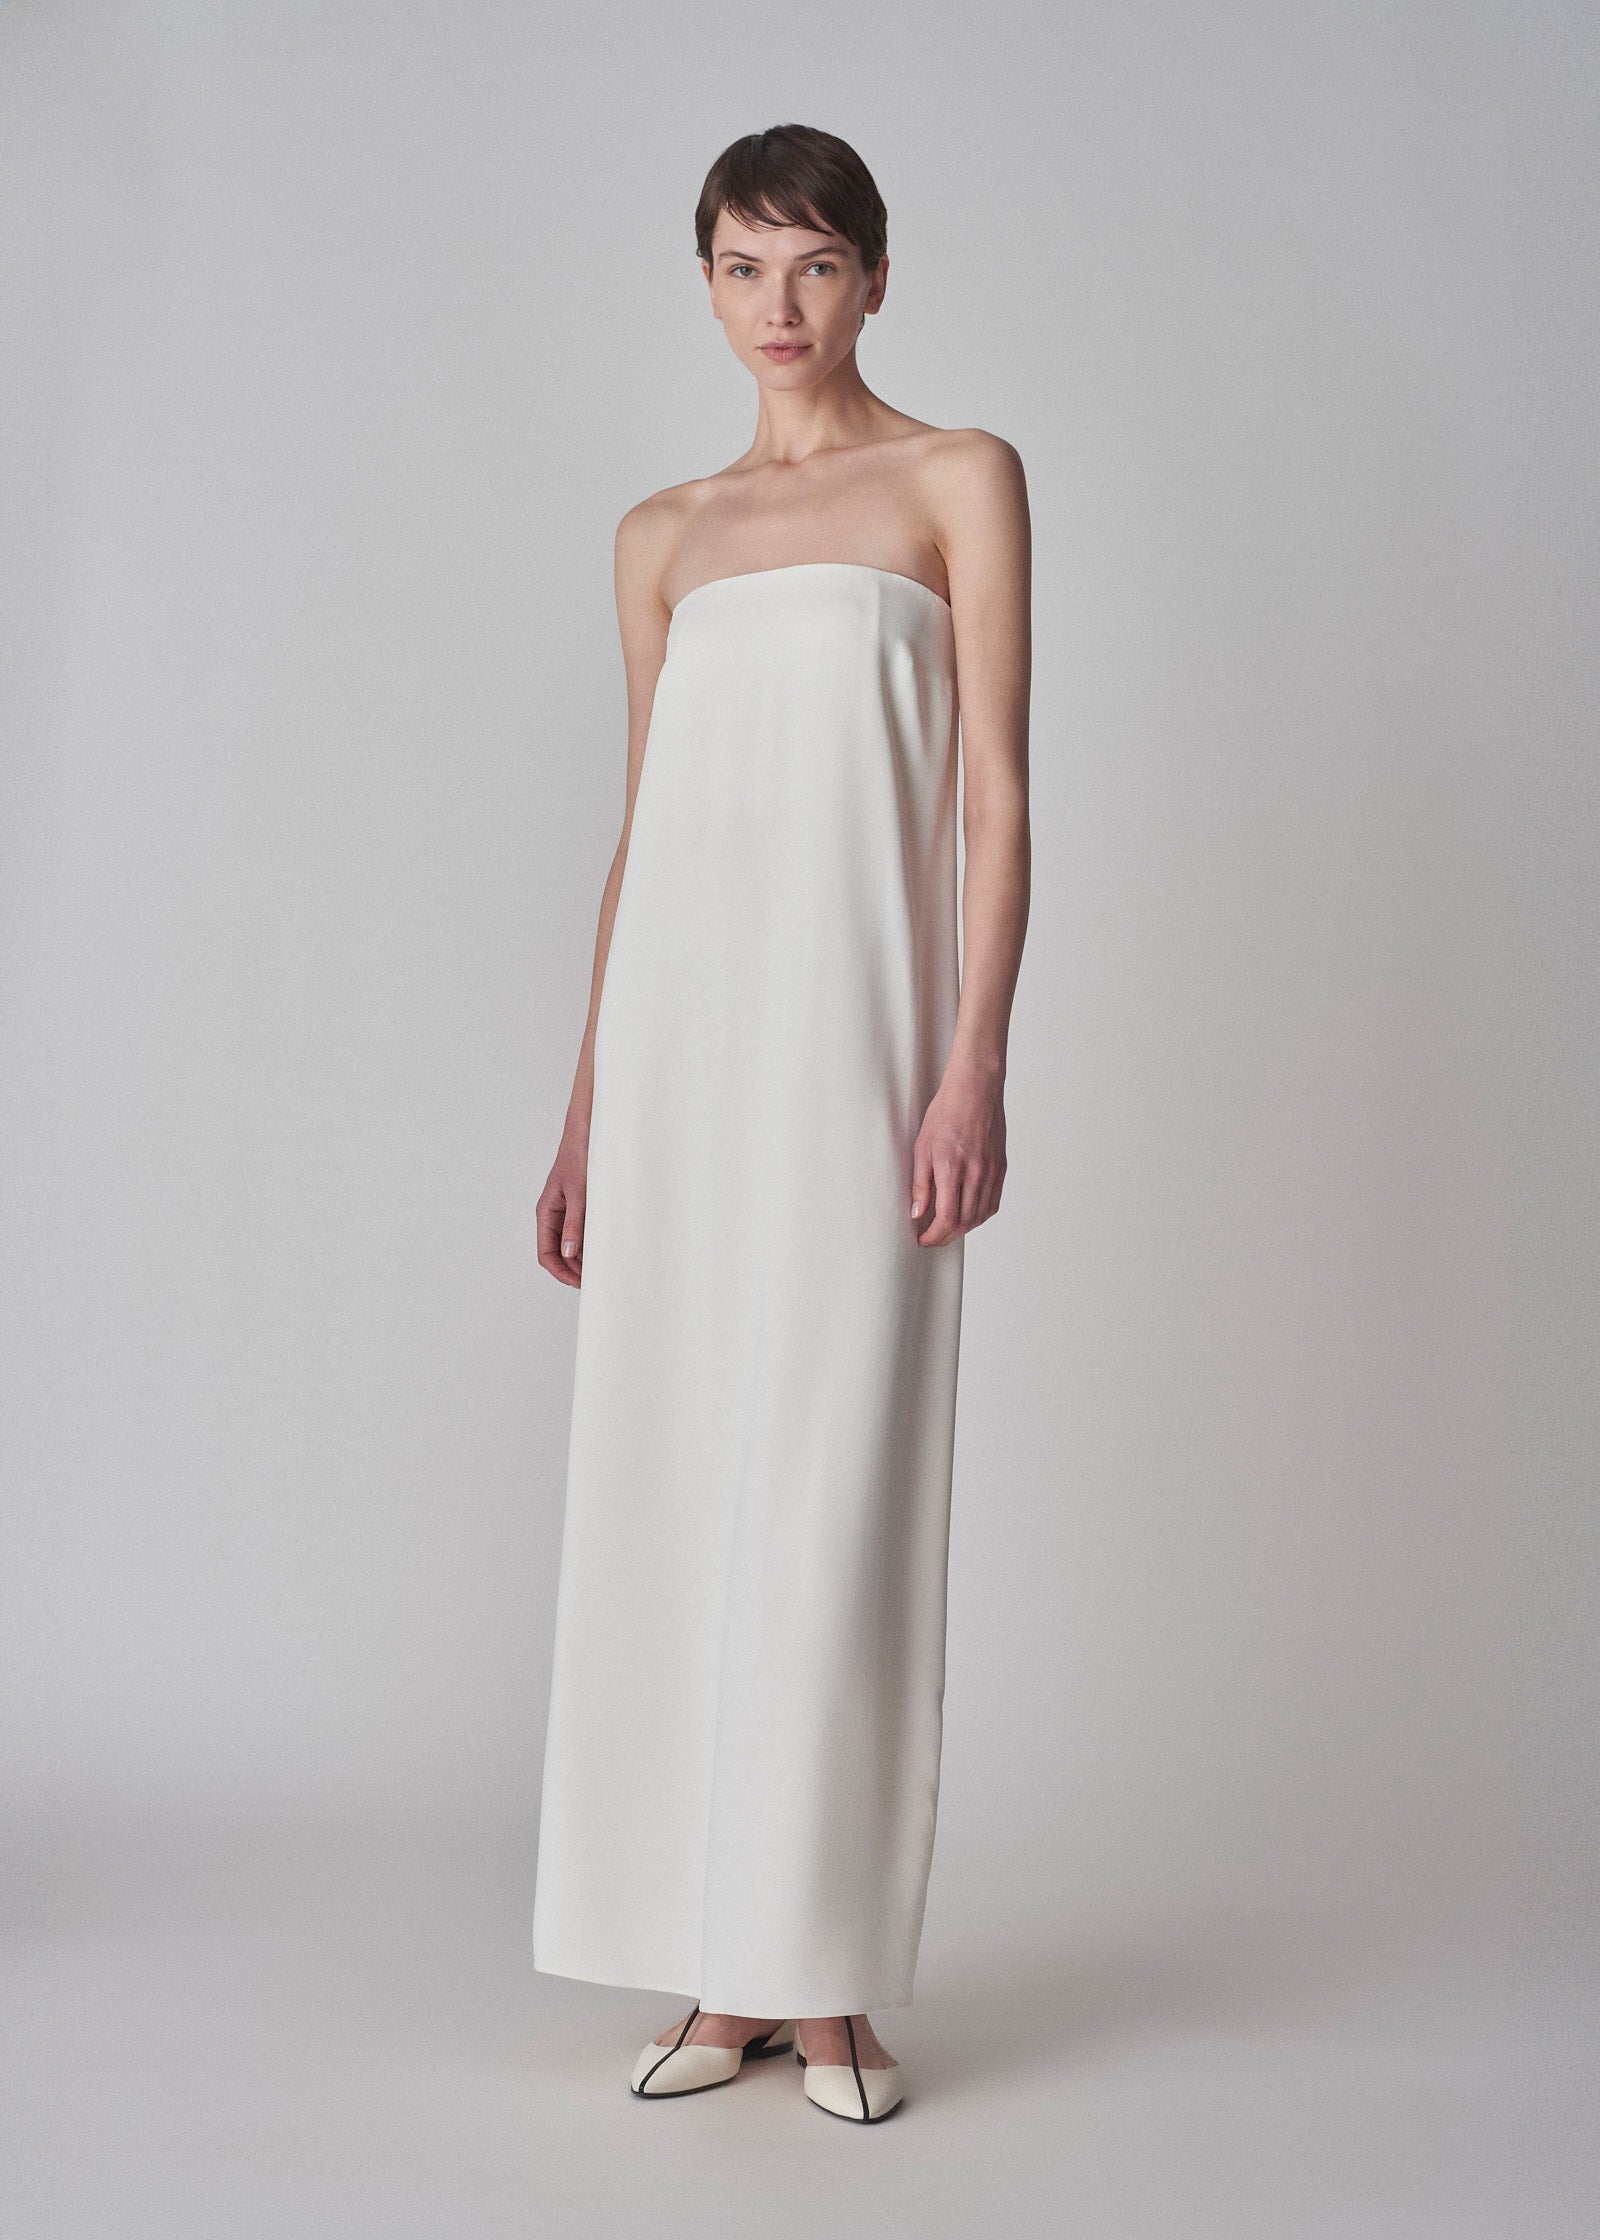 Strapless Column Dress in Viscose Crepe - Ivory - CO Collections